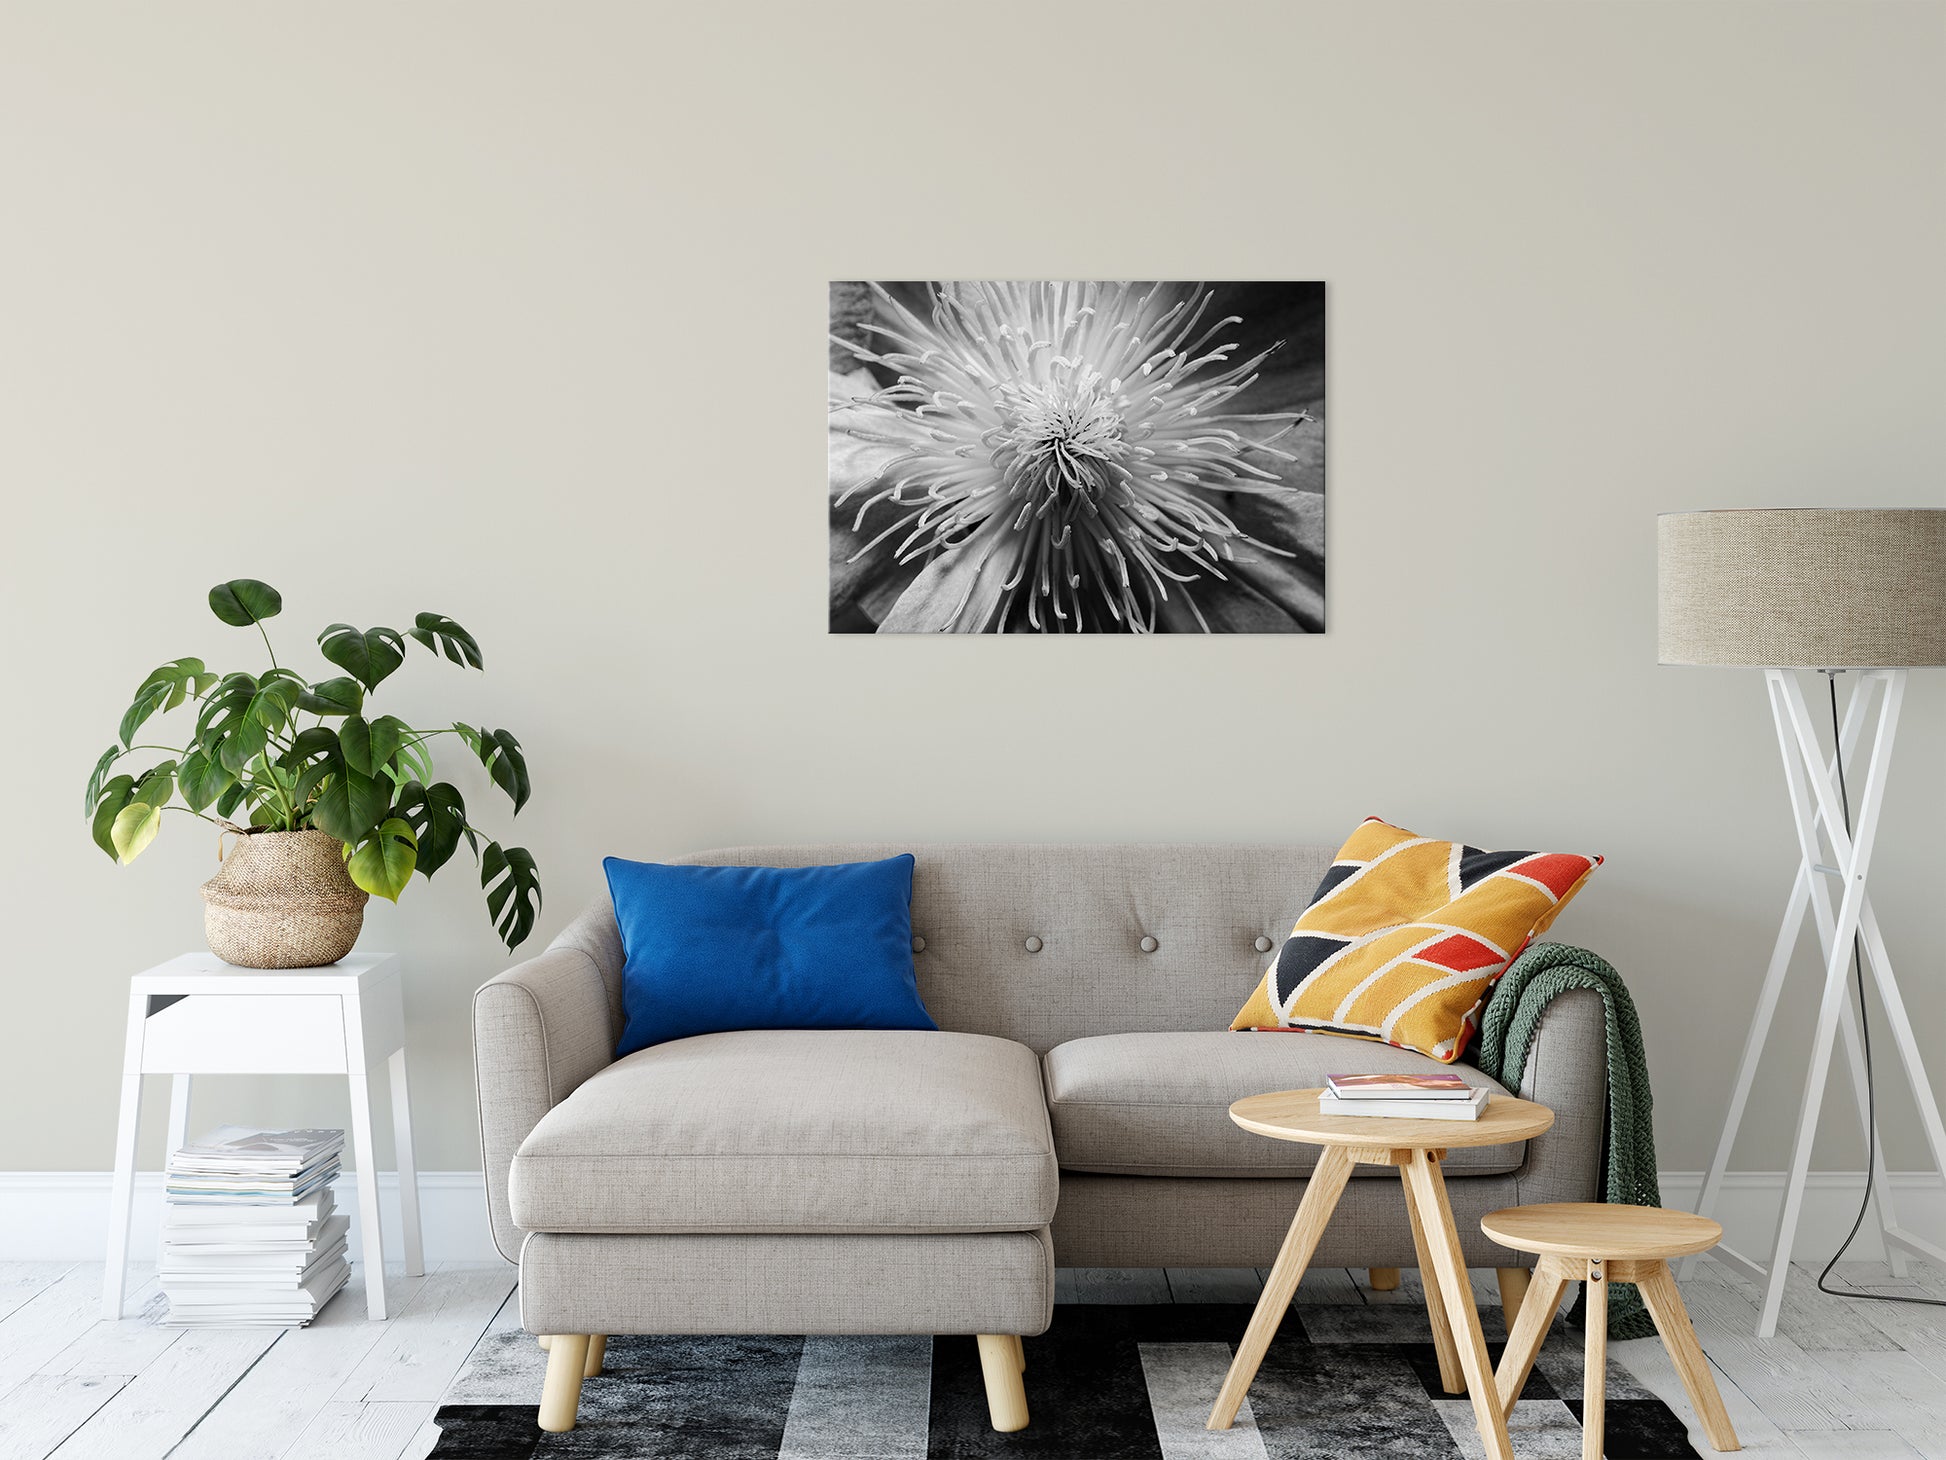 Center of Clematis - Black and White Nature / Floral Photo Fine Art Canvas Wall Art Prints 24" x 36" - PIPAFINEART